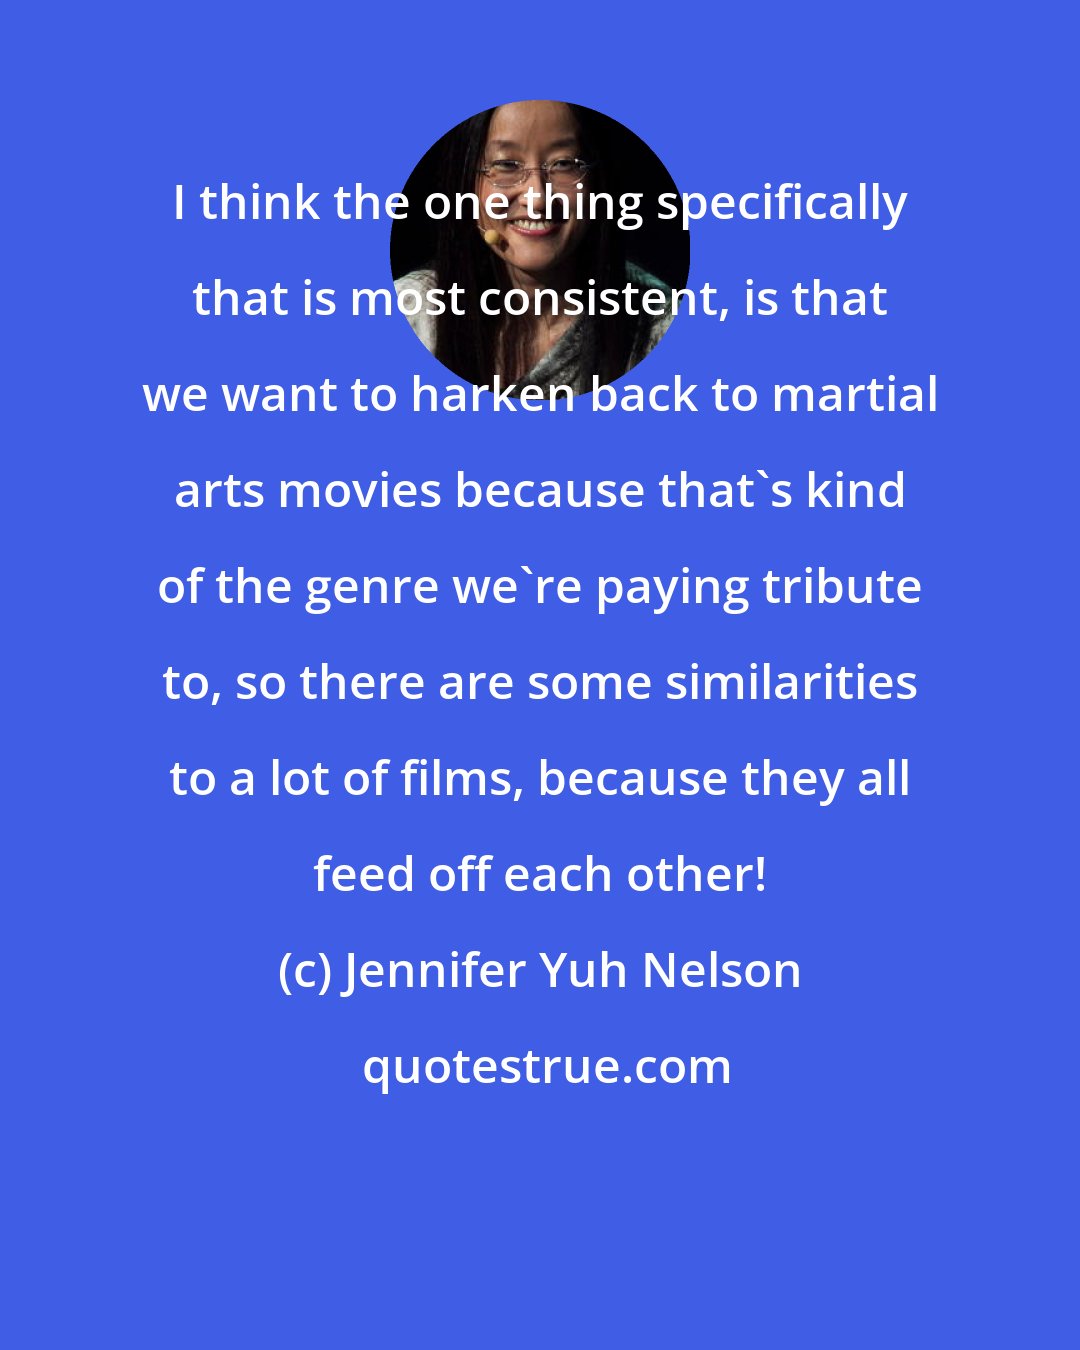 Jennifer Yuh Nelson: I think the one thing specifically that is most consistent, is that we want to harken back to martial arts movies because that's kind of the genre we're paying tribute to, so there are some similarities to a lot of films, because they all feed off each other!